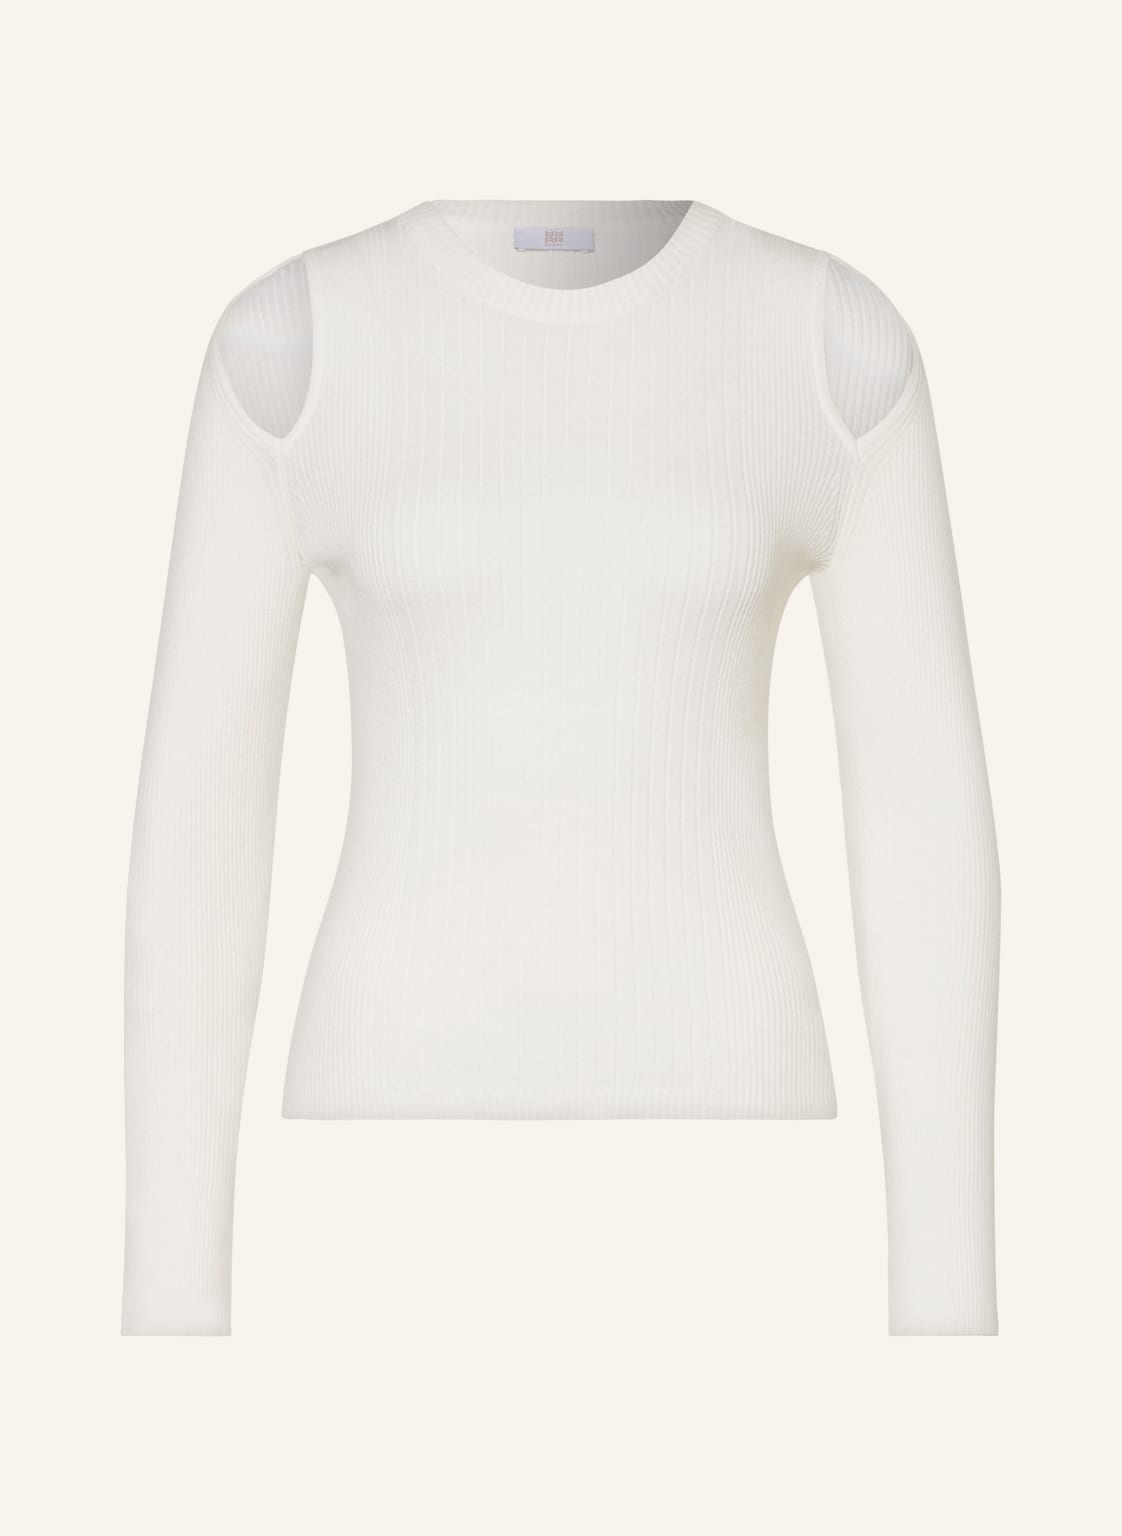 Riani Pullover Mit Cut-Outs weiss von RIANI